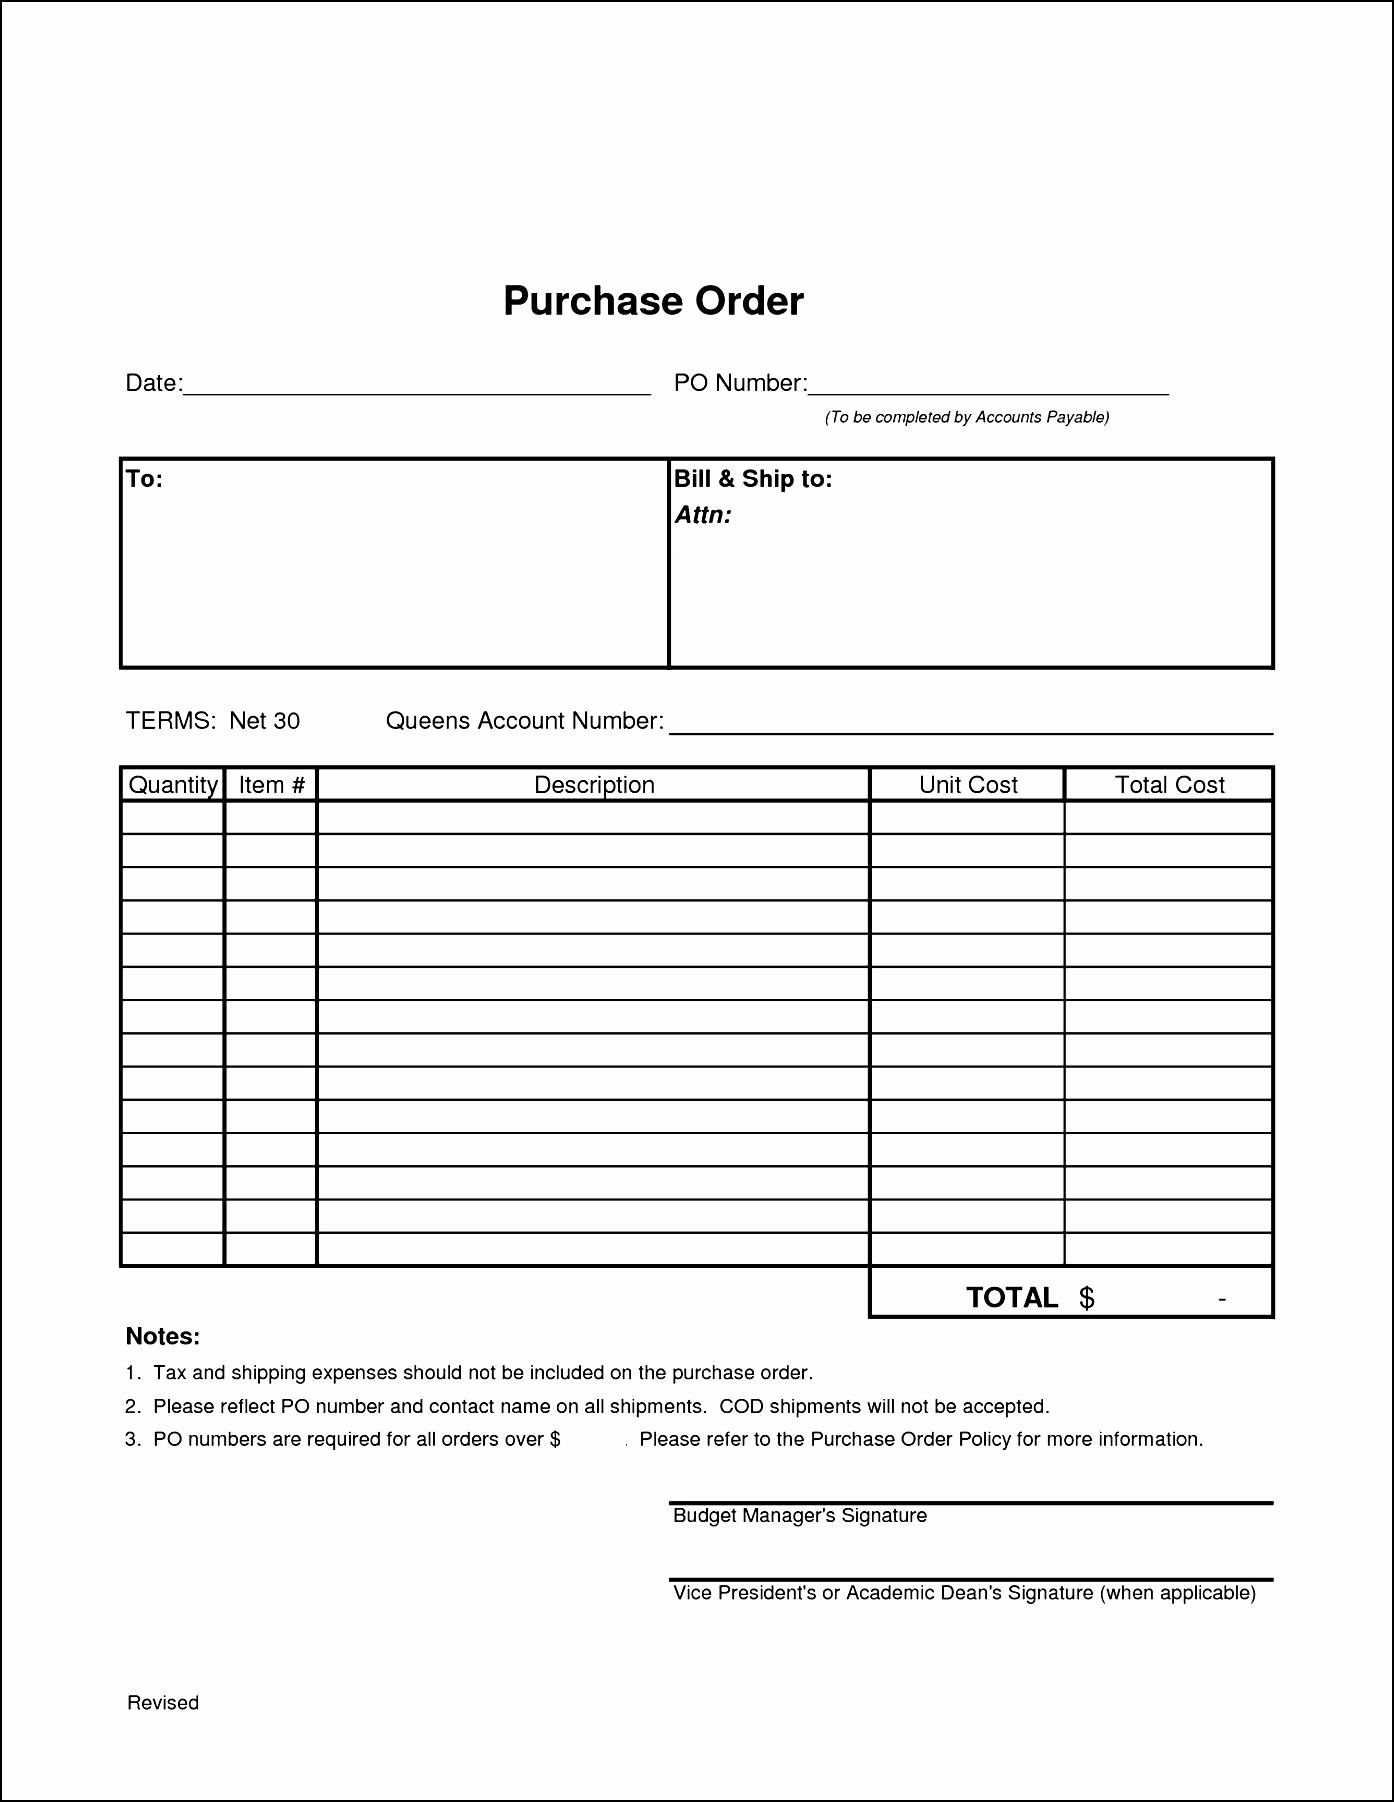 Purchase order Template Microsoft Word Inspirational Purchase order Template Microsoft Word Bamboodownunder